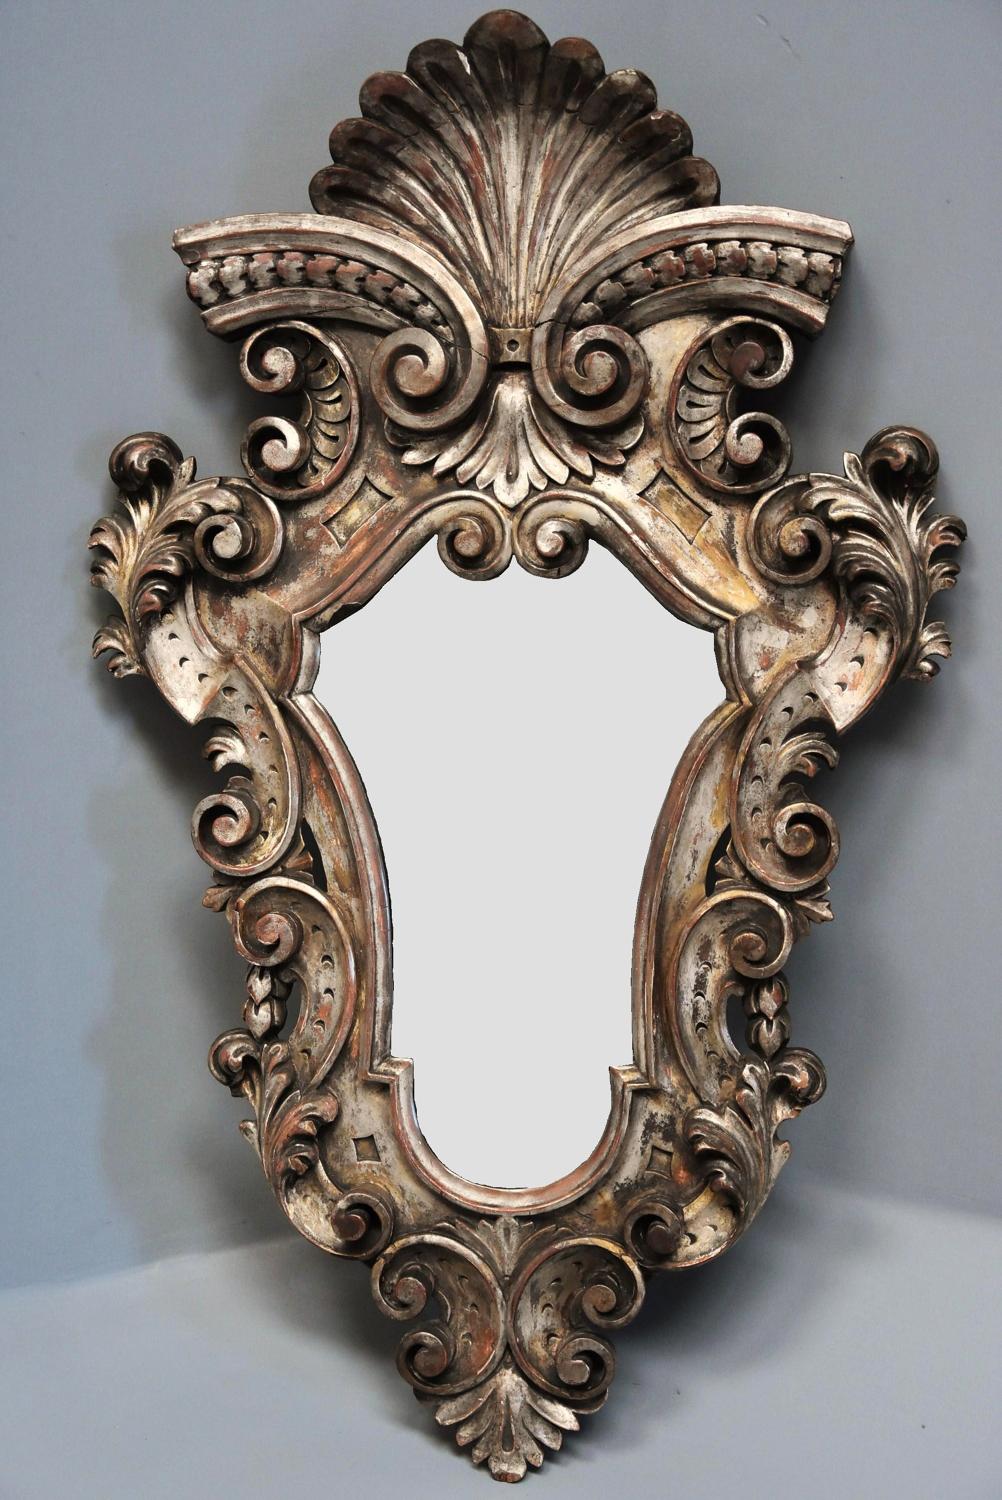 Highly decorative 19thc Italian silver giltwood Rococo style mirror in SOLD ARCHIVE